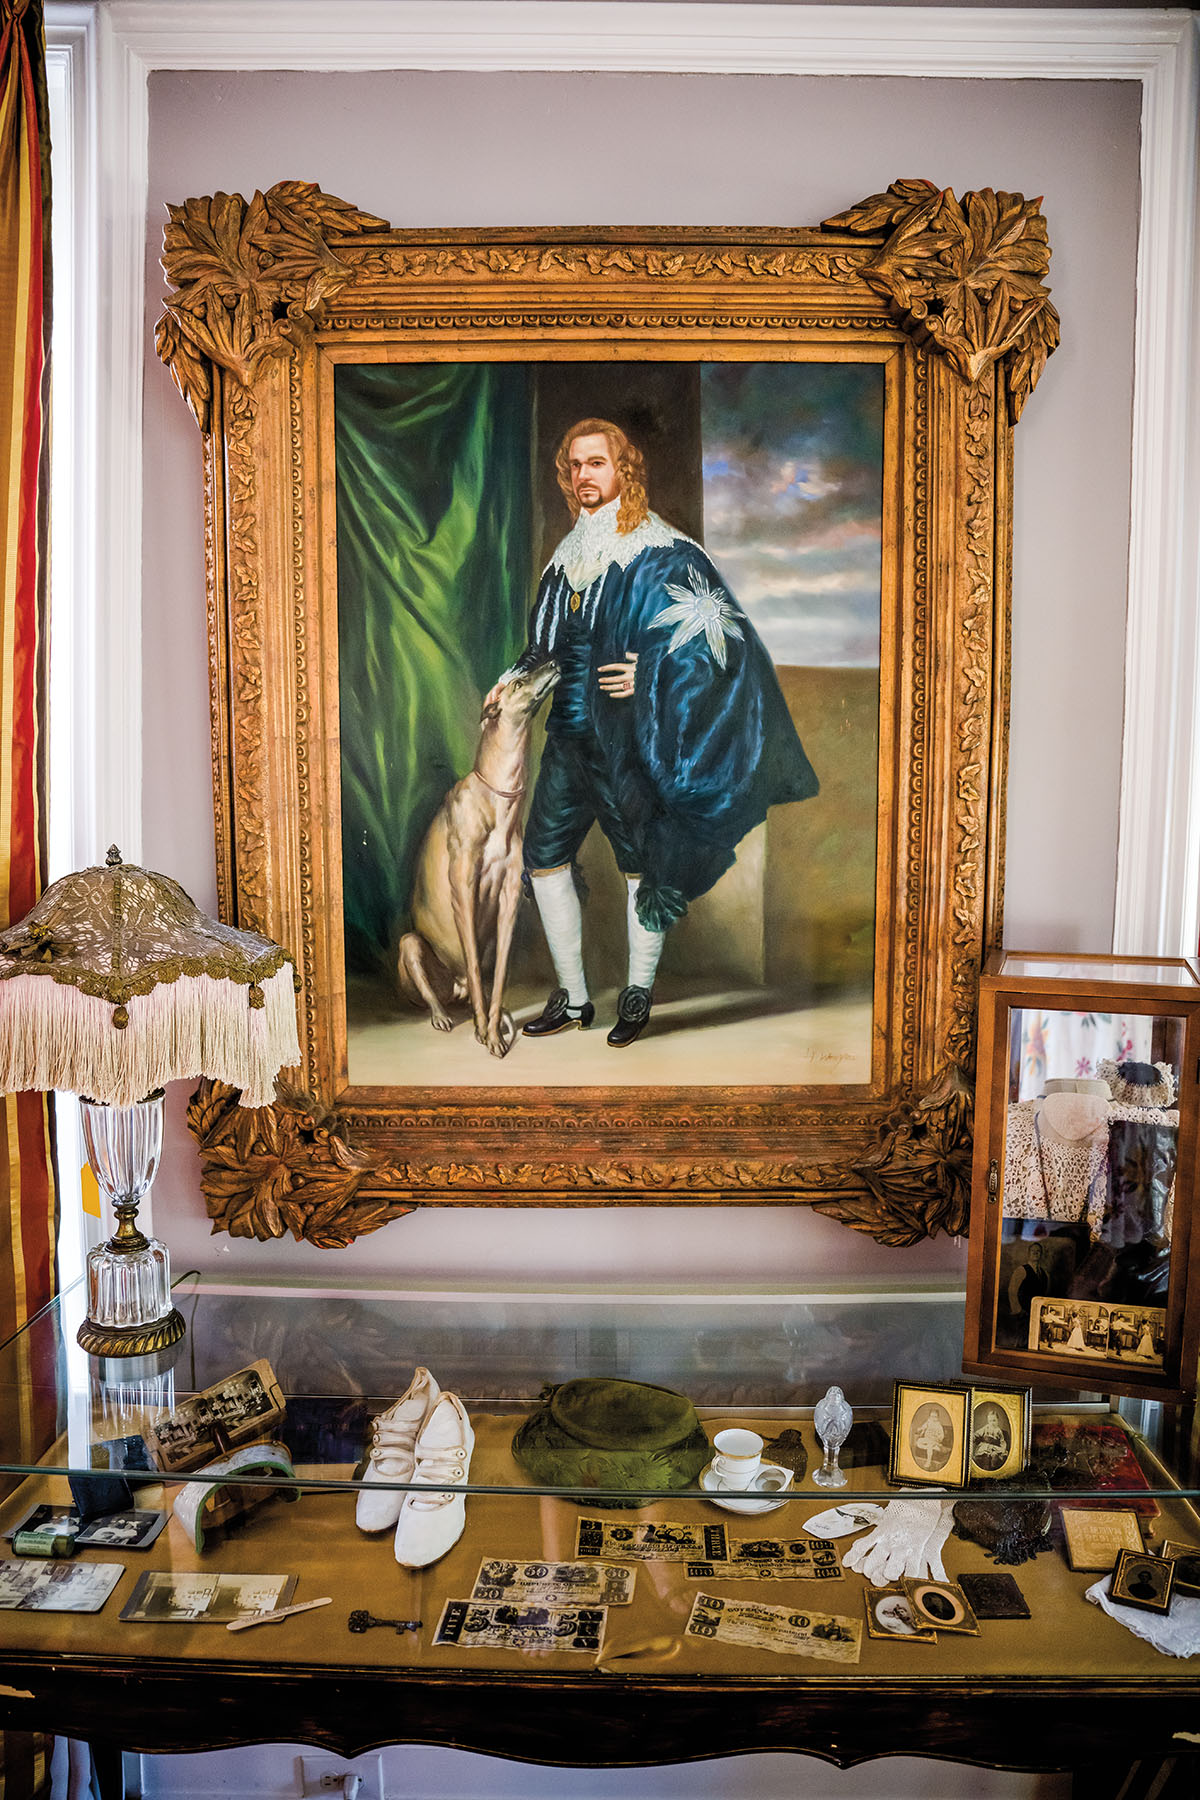 A framed portrait of a person wearing a navy cape petting a dog above a case of numerous antiques